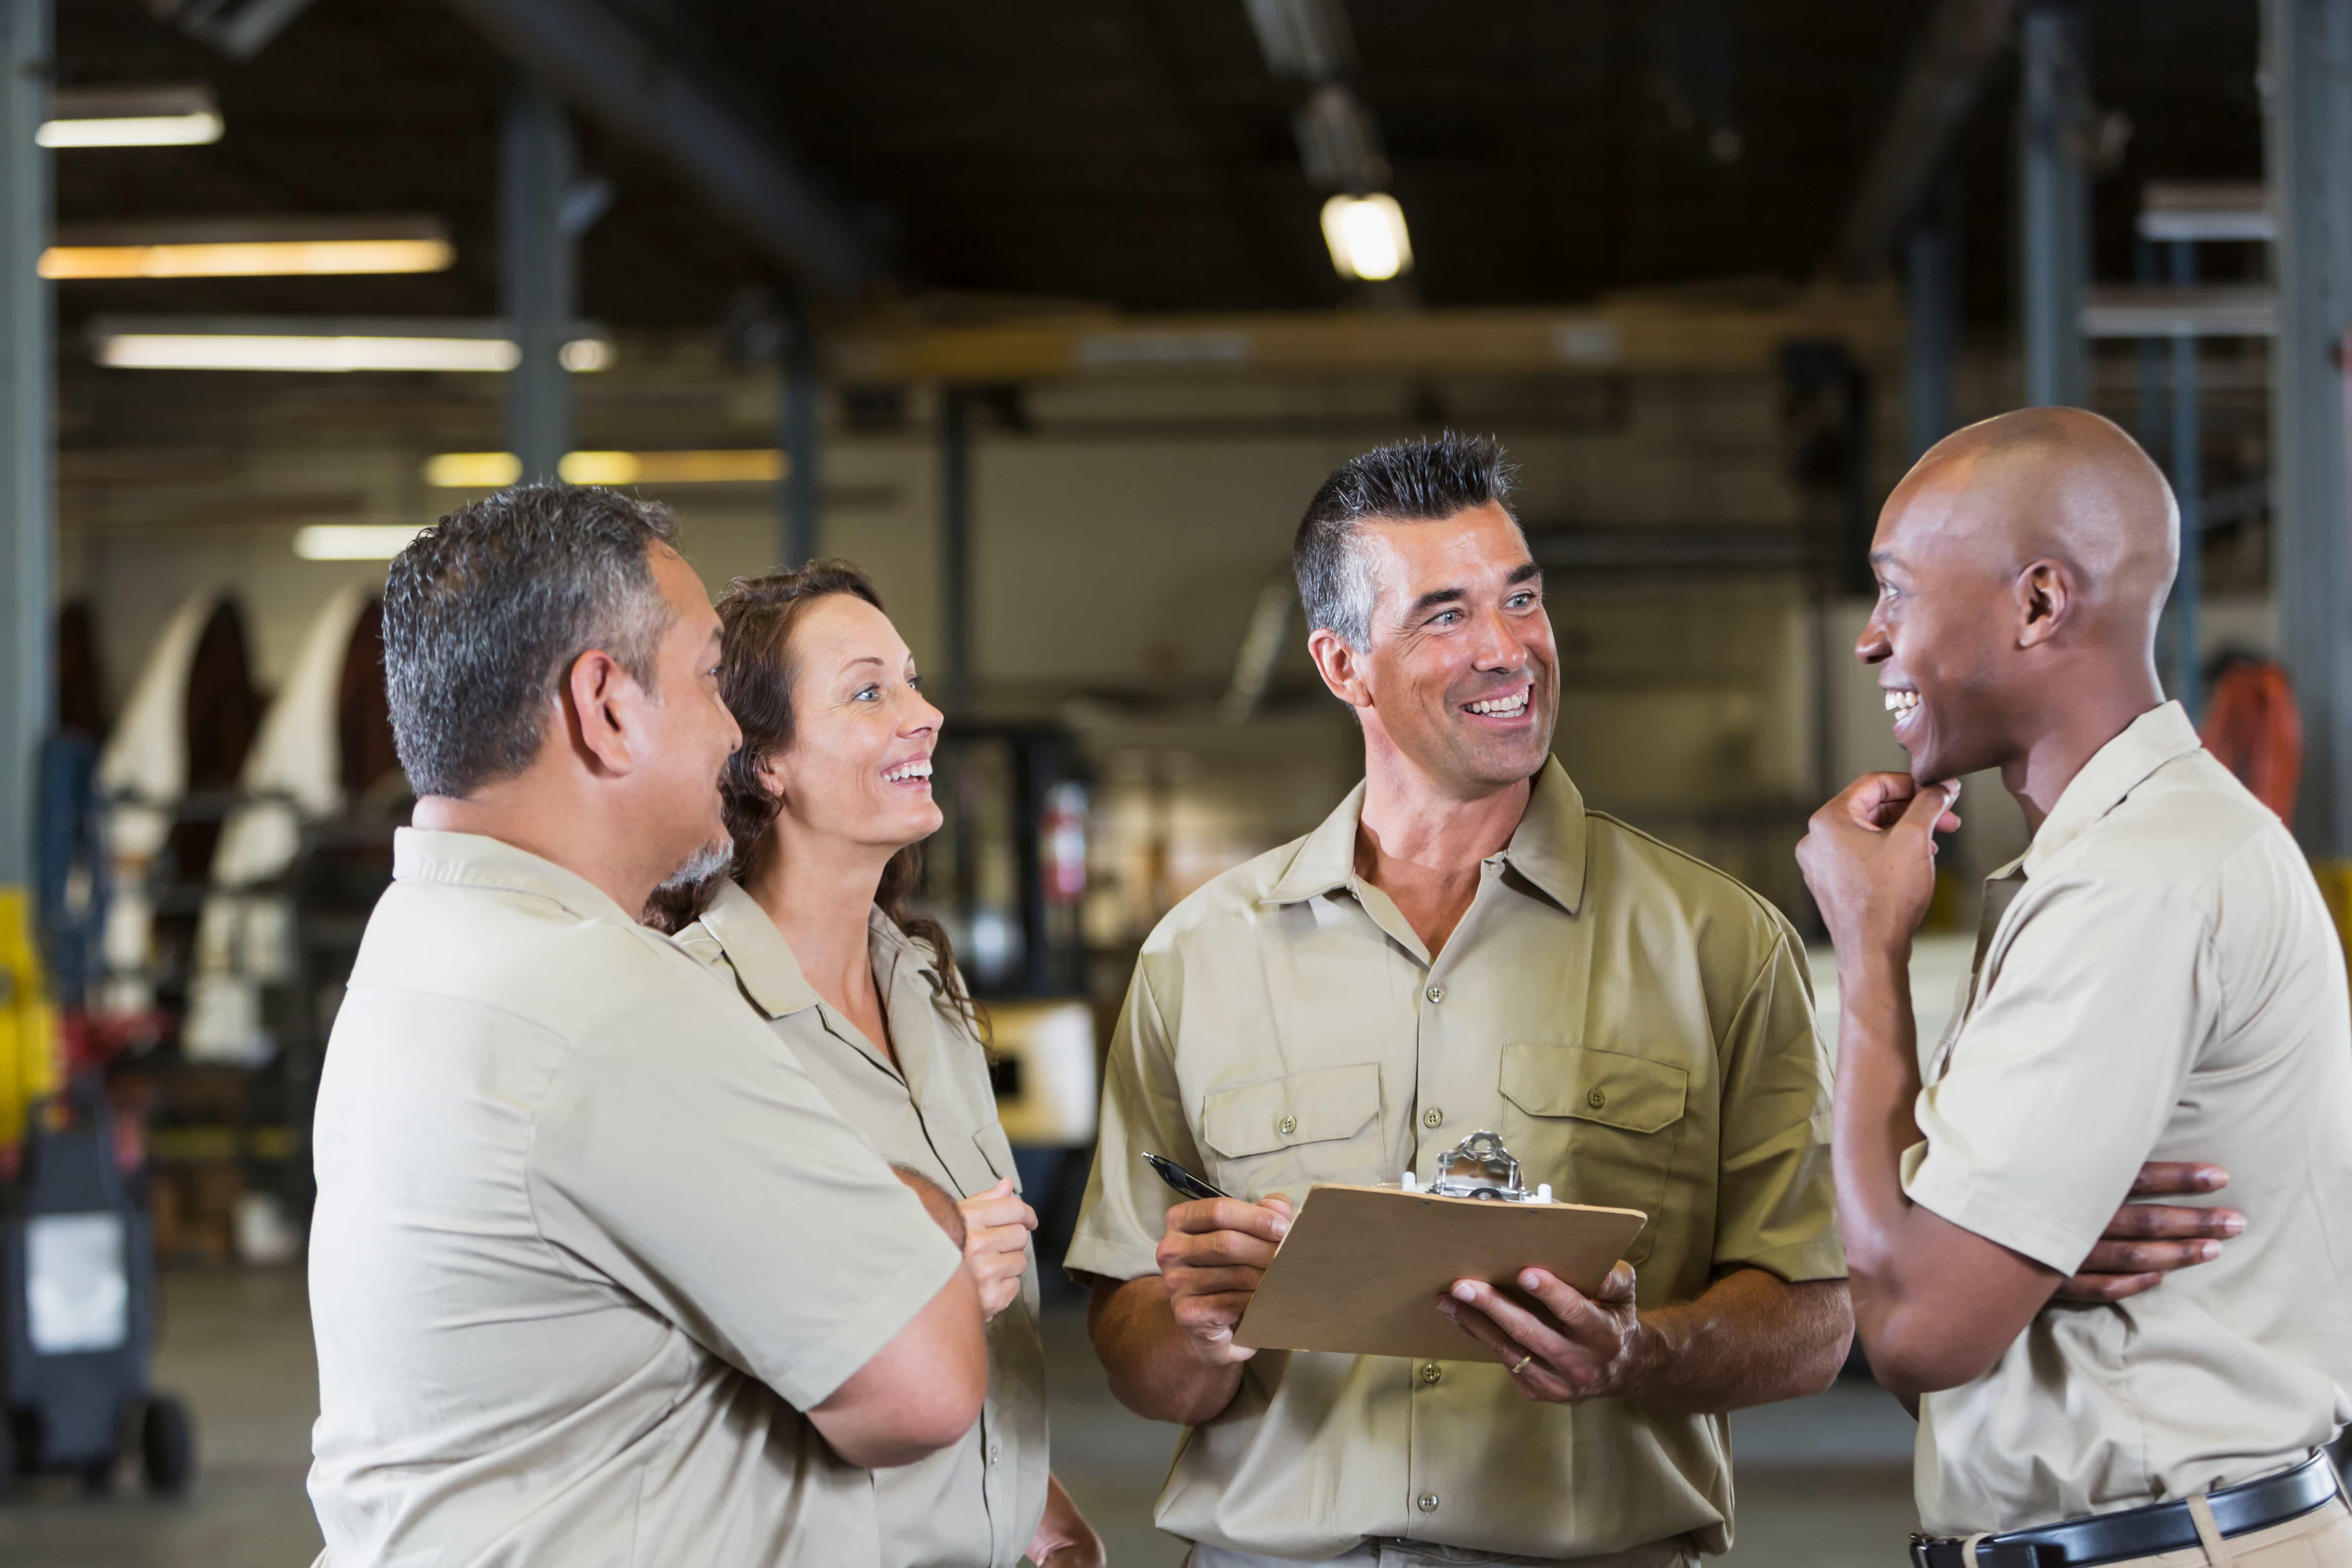 Four workers at a trucking company, standing in a garage, laughing